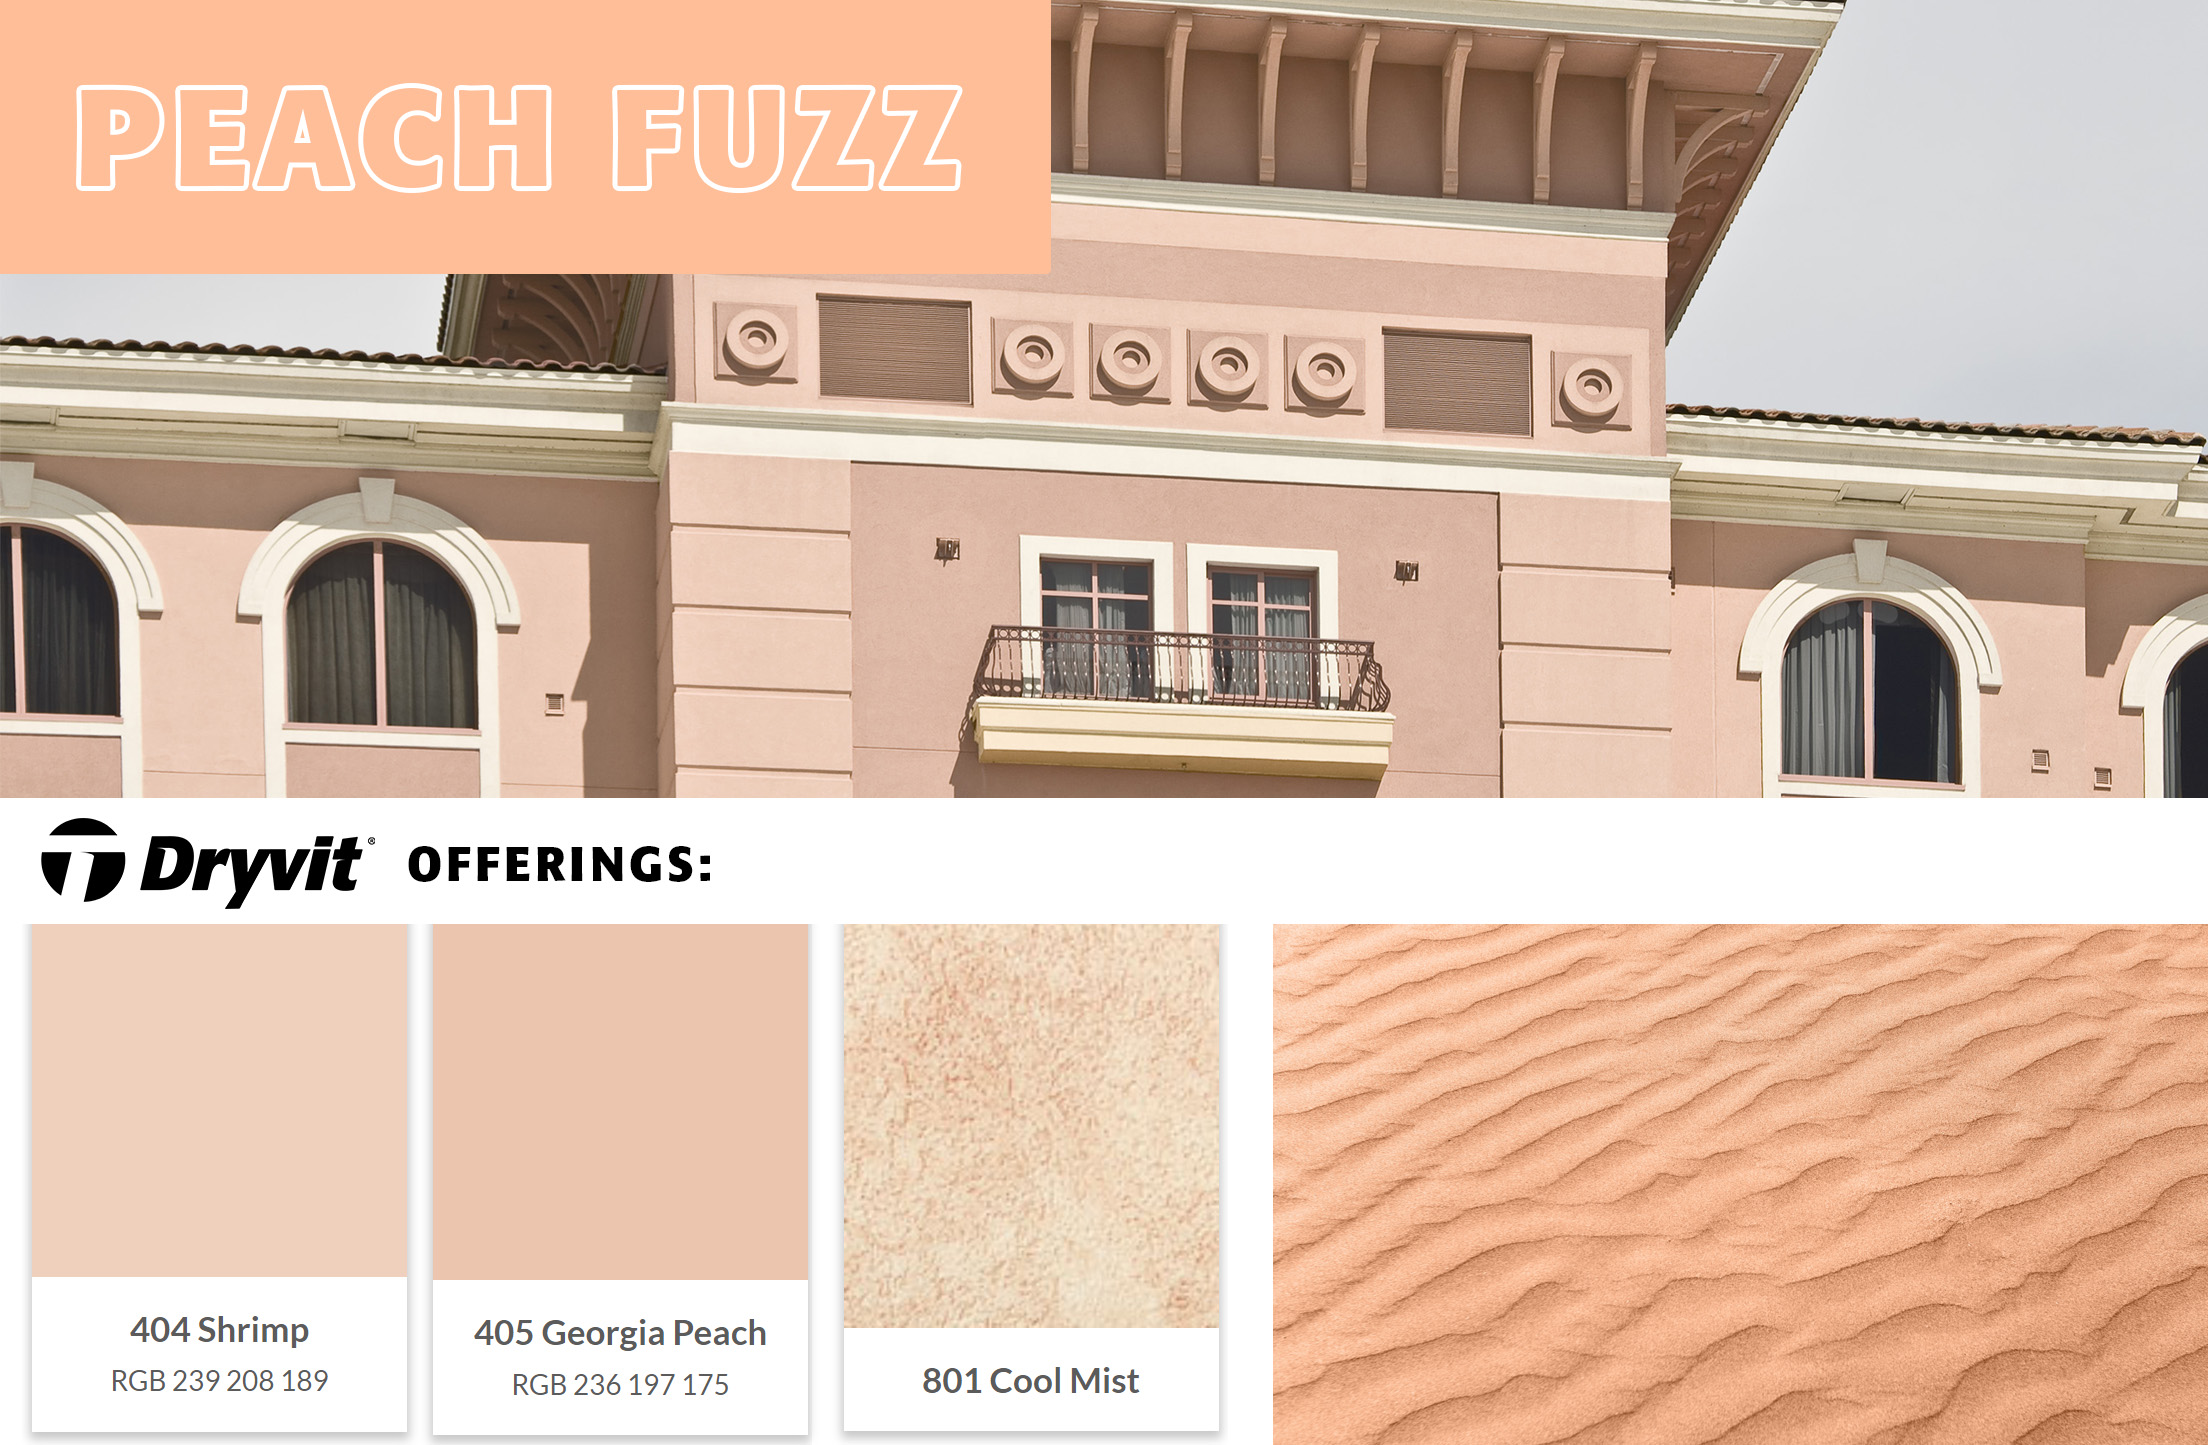 a collage of images showing a soft pink hue. Images include desert sand and hotel/resort building clad in a light pink exterior wall finish.